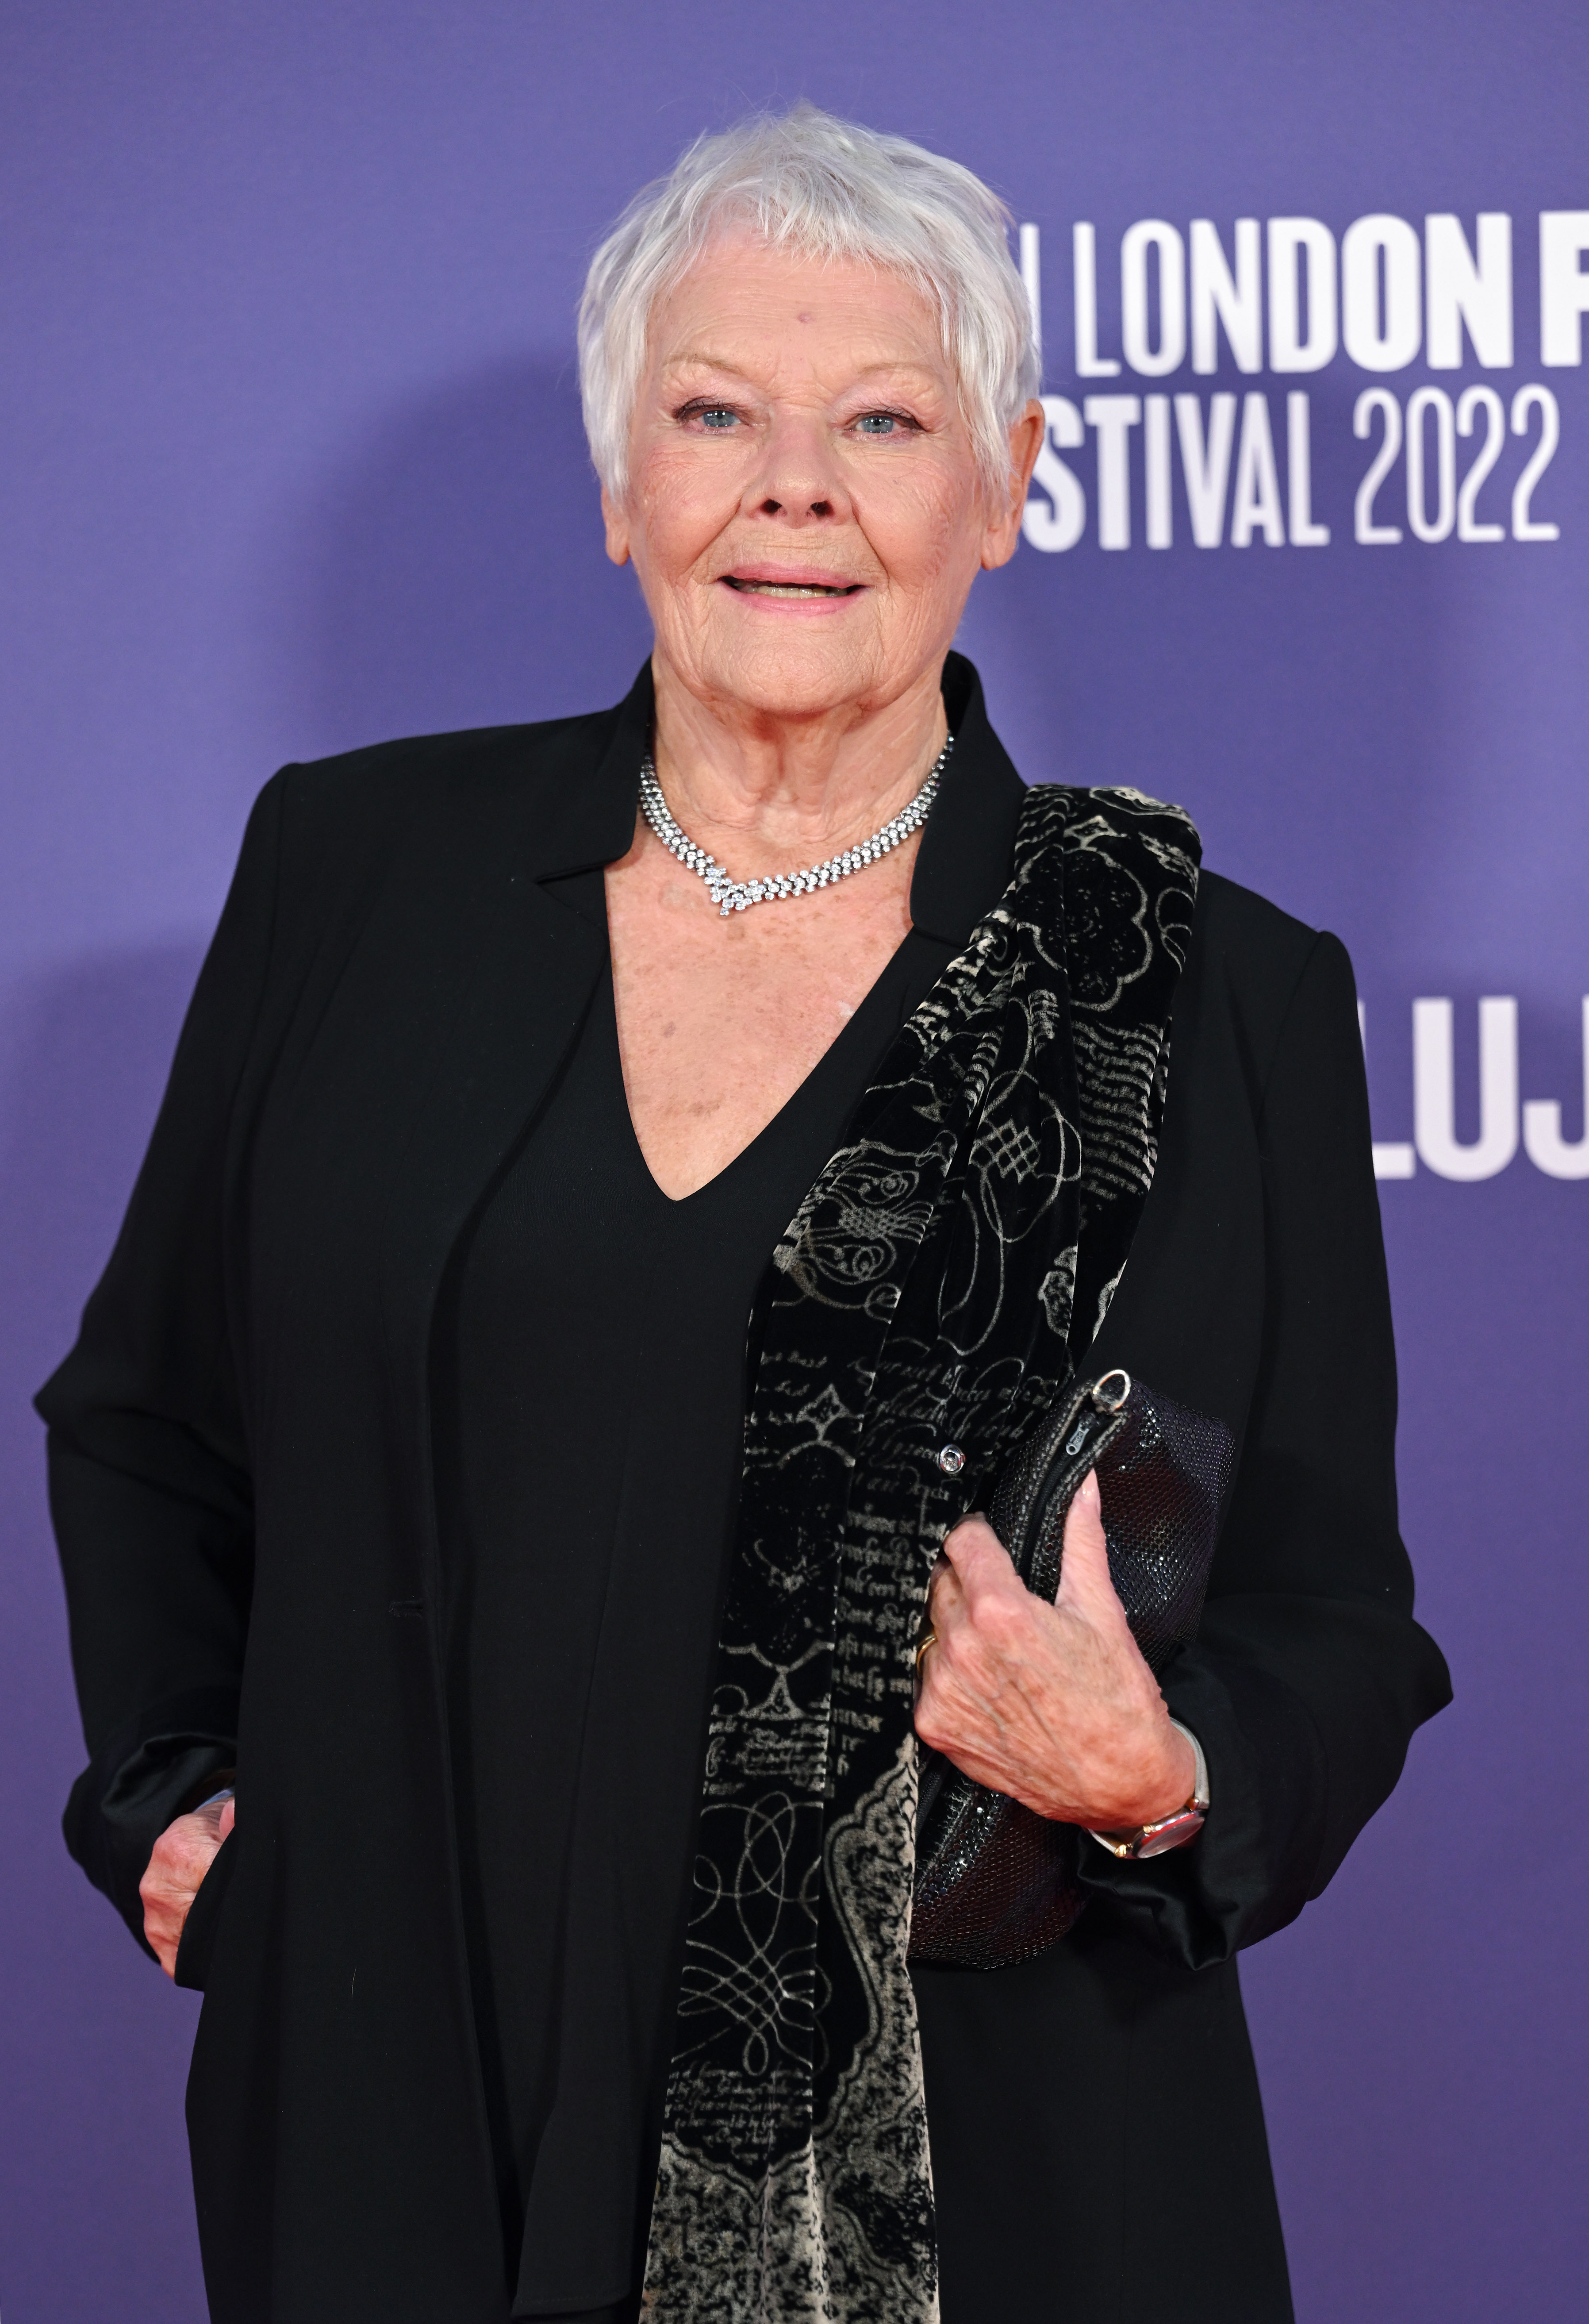 Dame Judi Dench attends the "Allelujah" European Premiere during the 66th BFI London Film Festival in London, England, on October 9, 2022. | Source: Getty Images